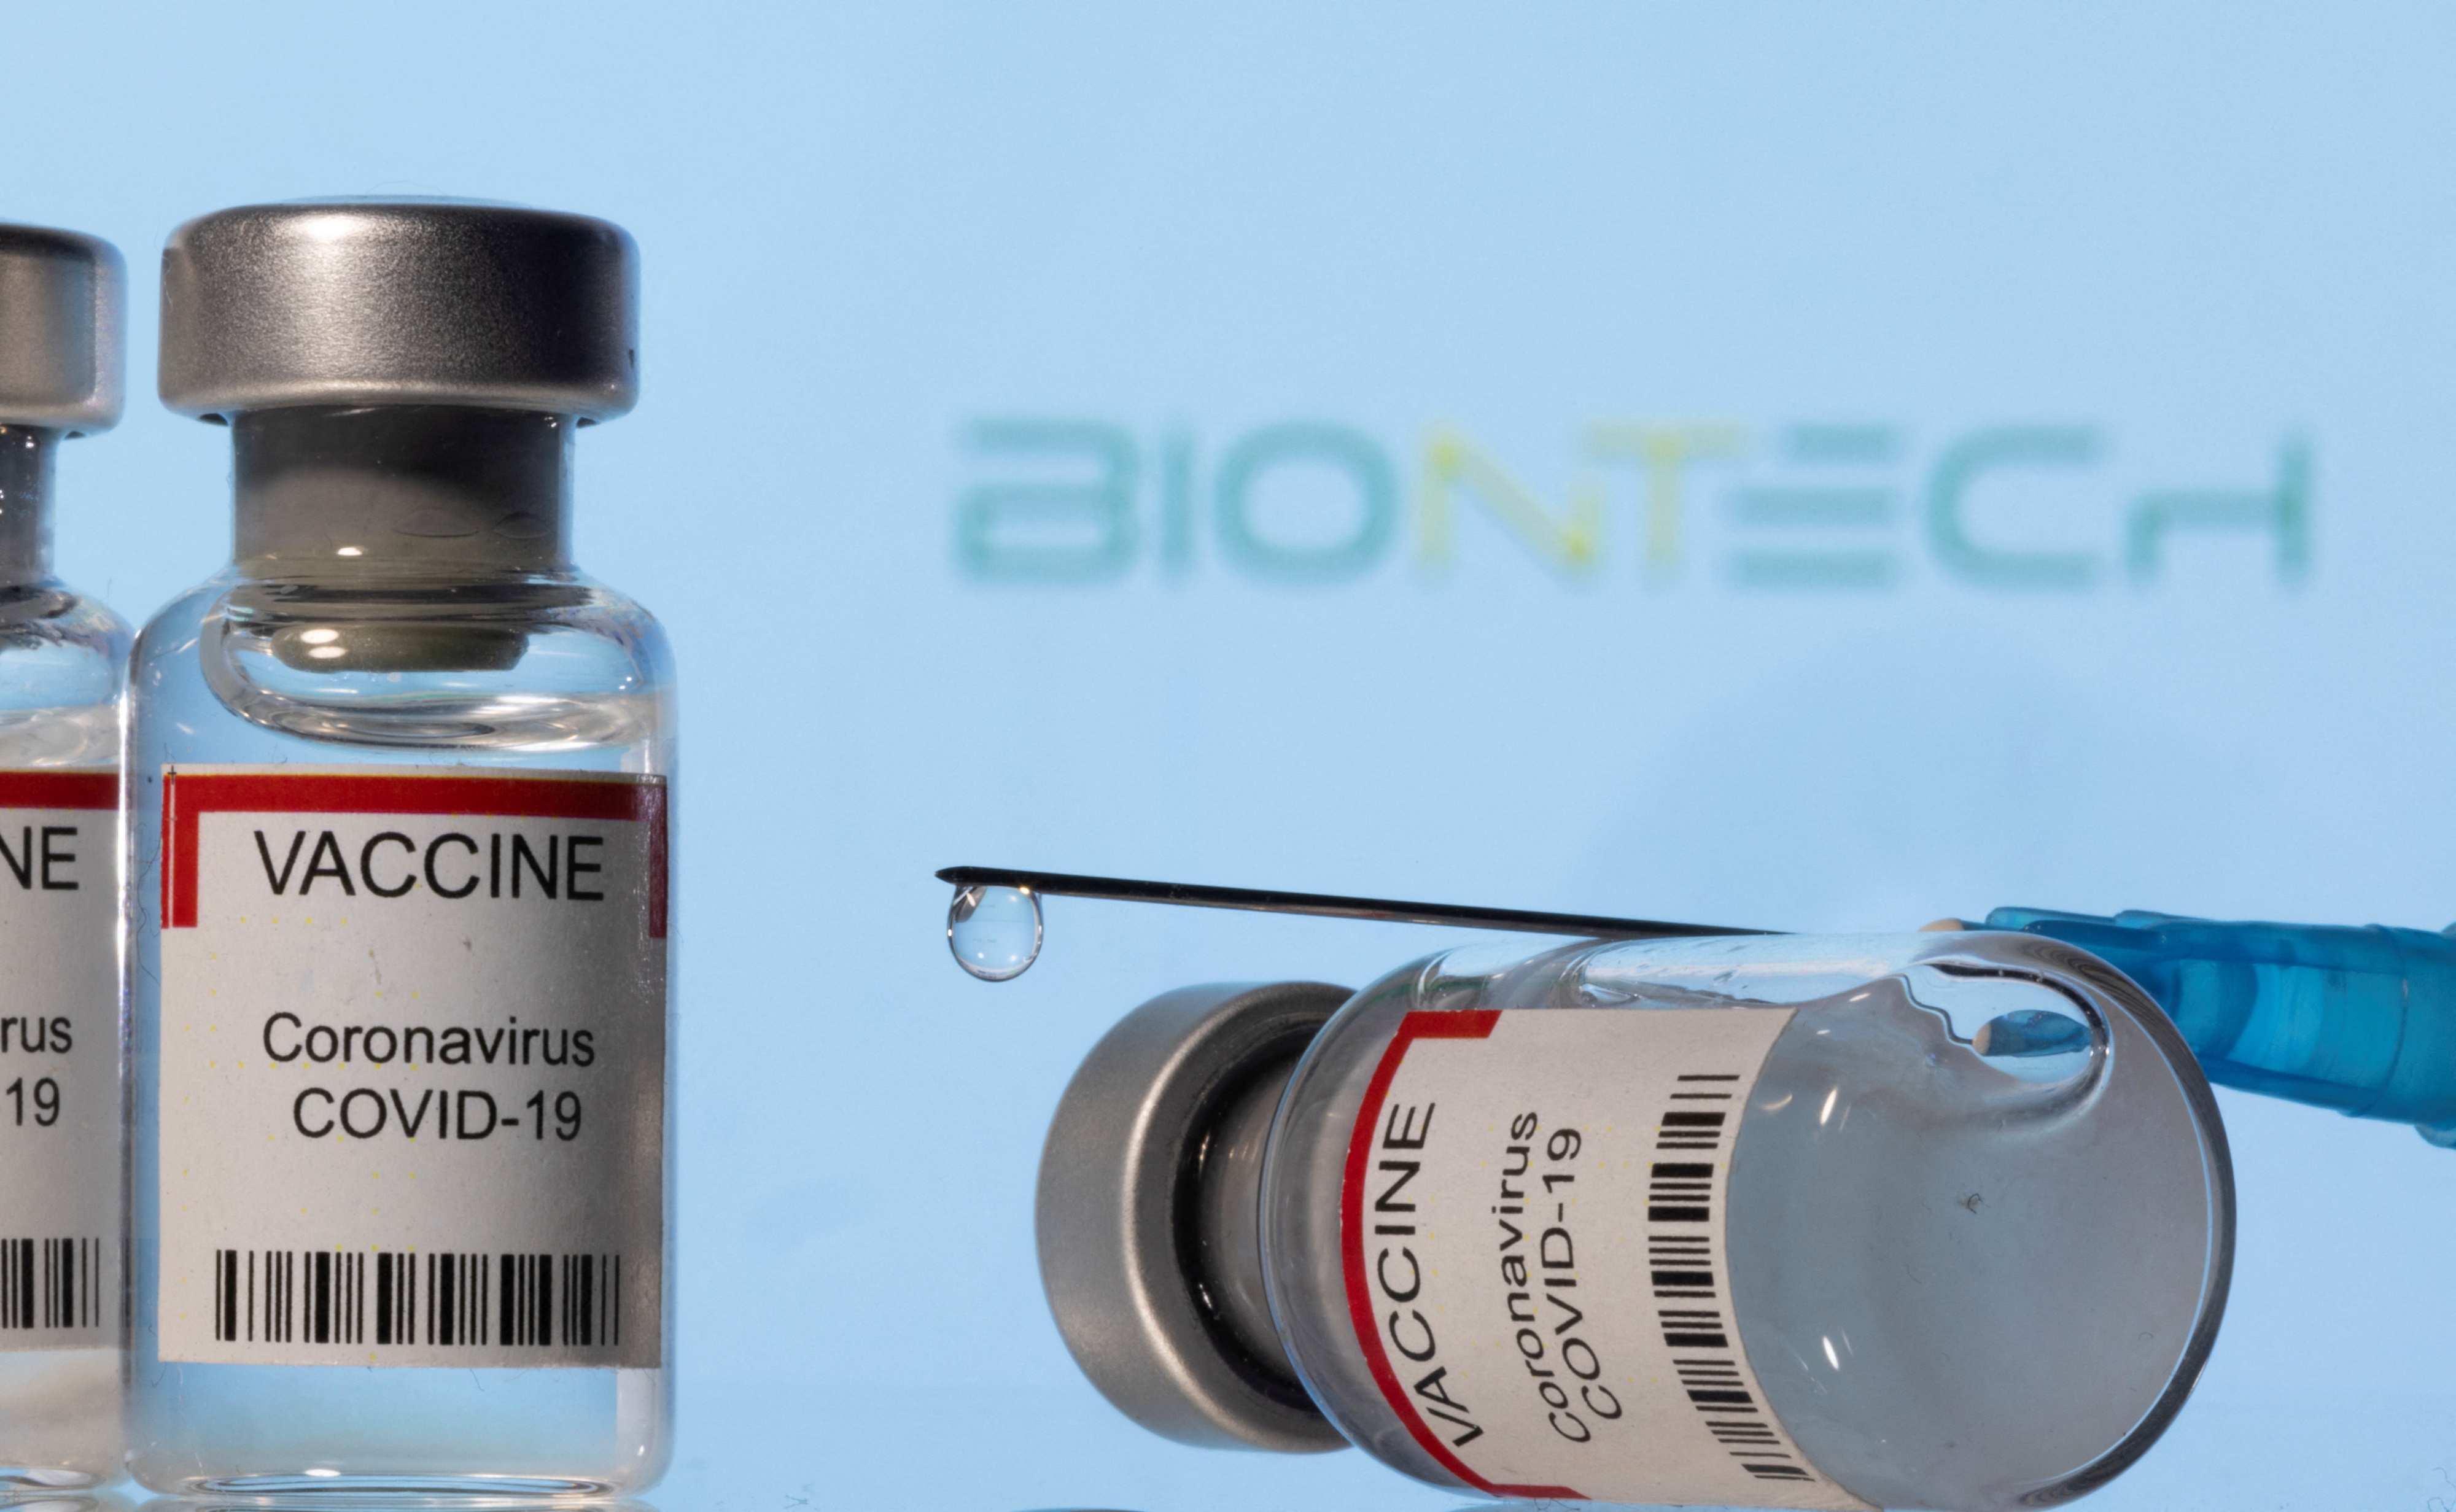 Illustration shows vials labelled "VACCINE Coronavirus COVID-19" and a syringe in front of a displayed Biontech logo